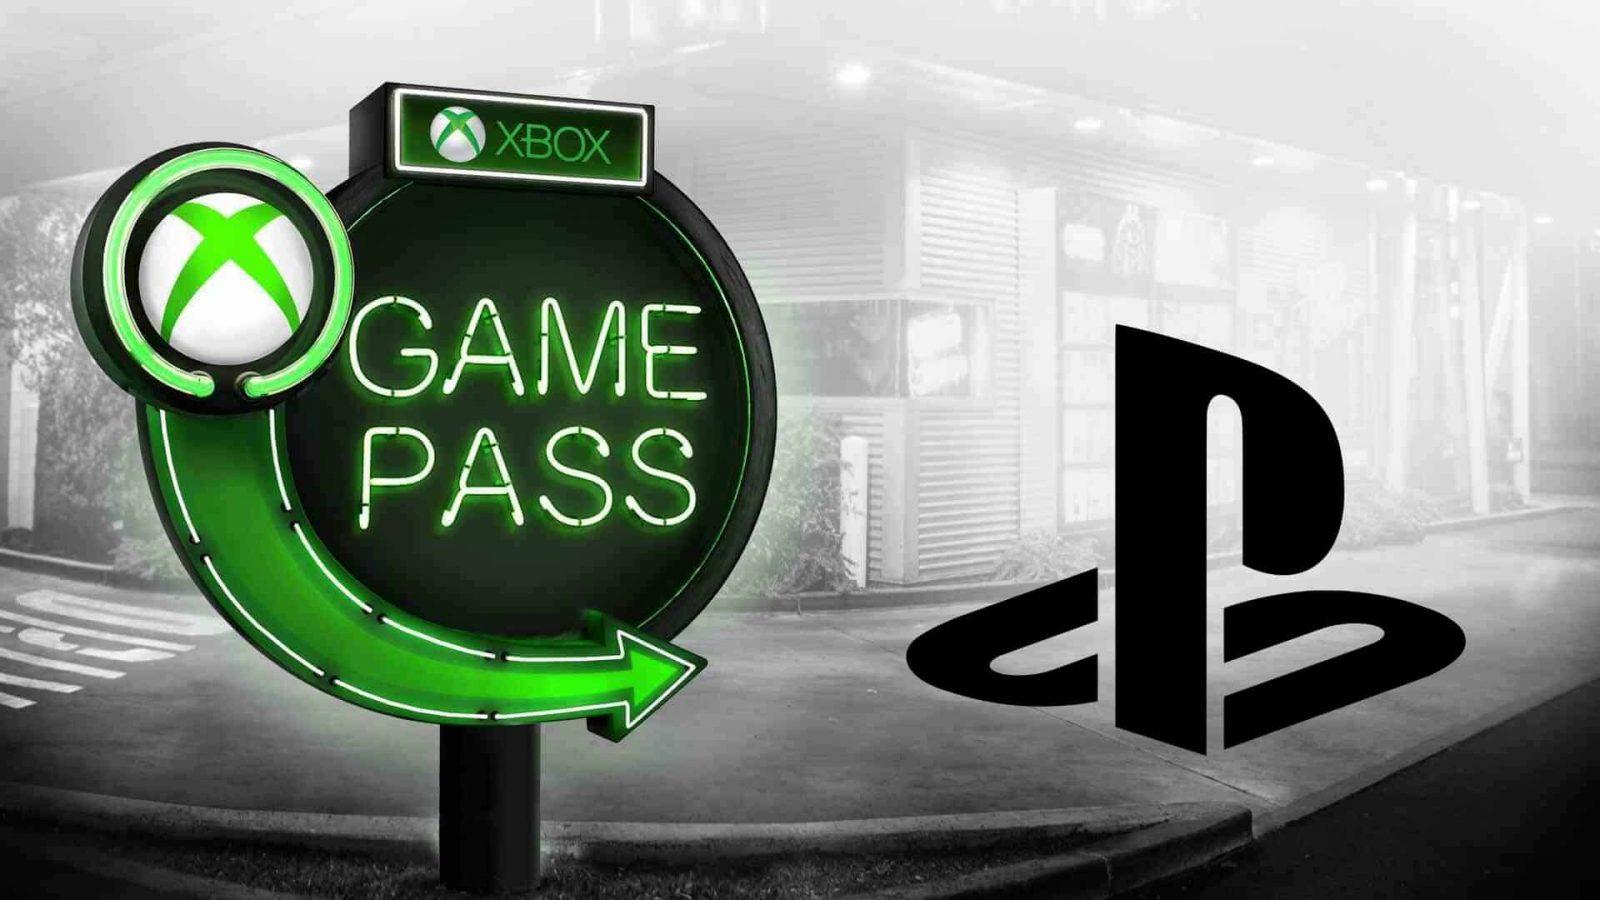 xbox game pass and playstation logos